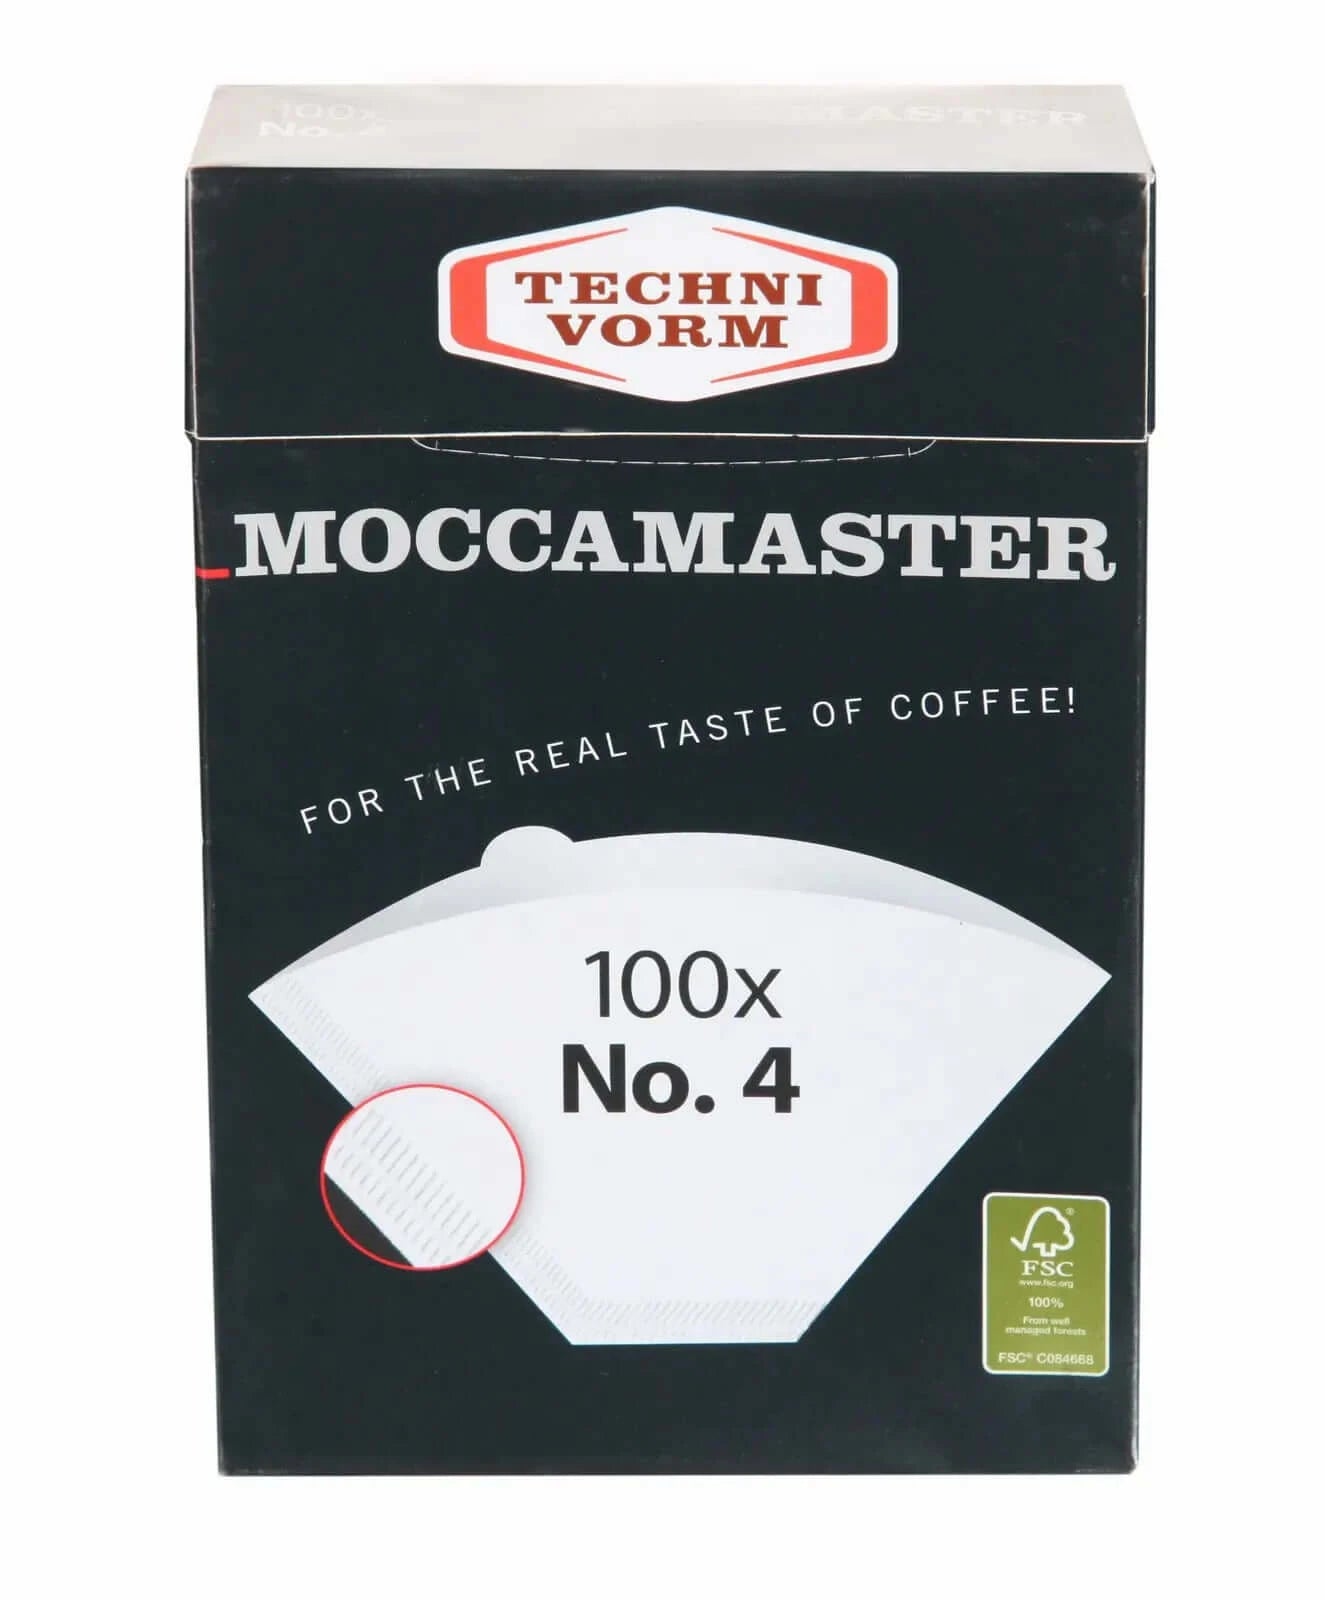 Moccamaster Coffee Filter White Nr. 4 (100 per pack)